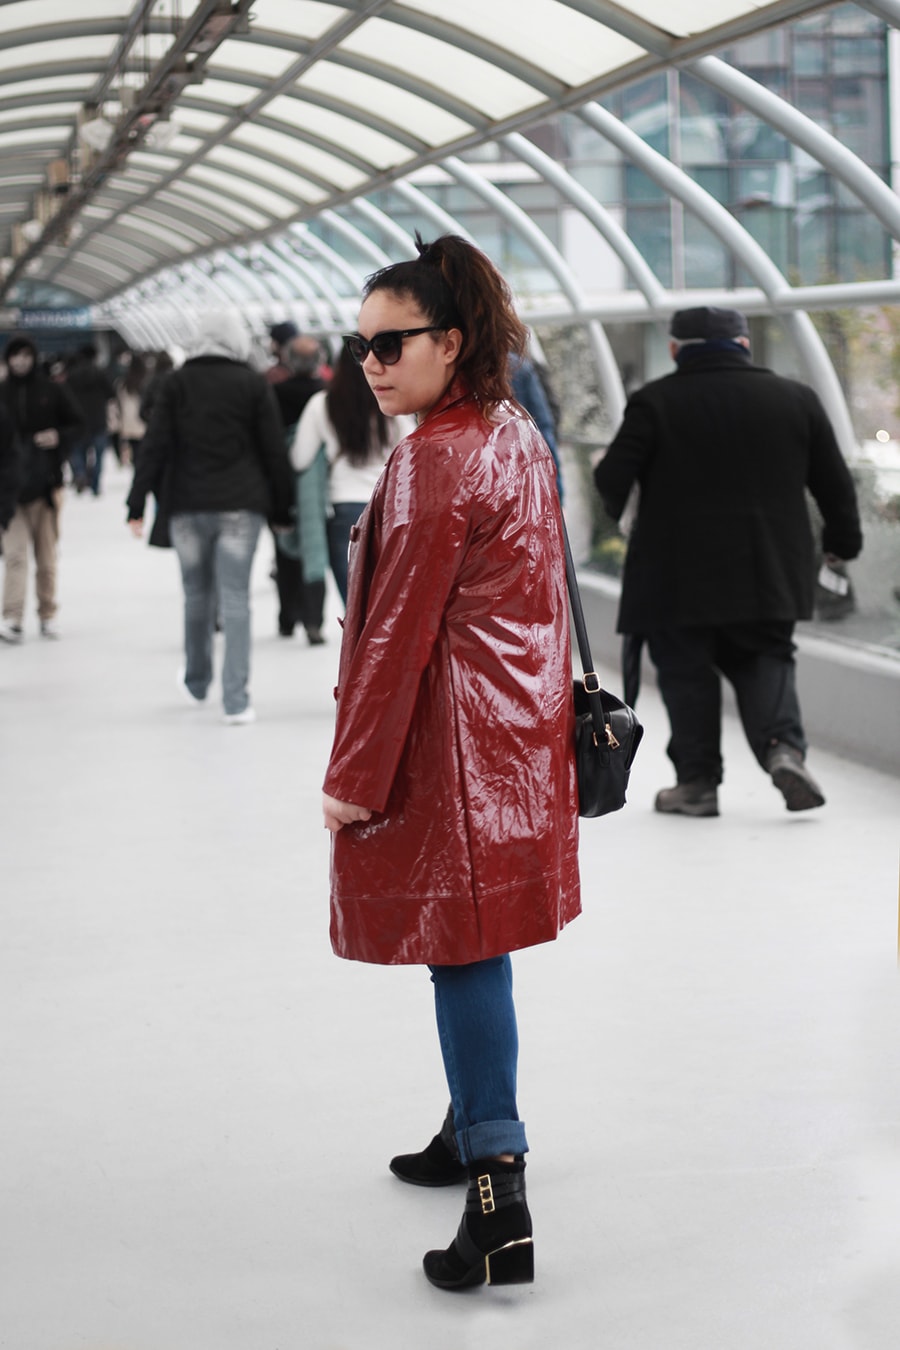 Patent leather vintage red trench coat + jeans and graphic tee + golden strokes - luisa verdee